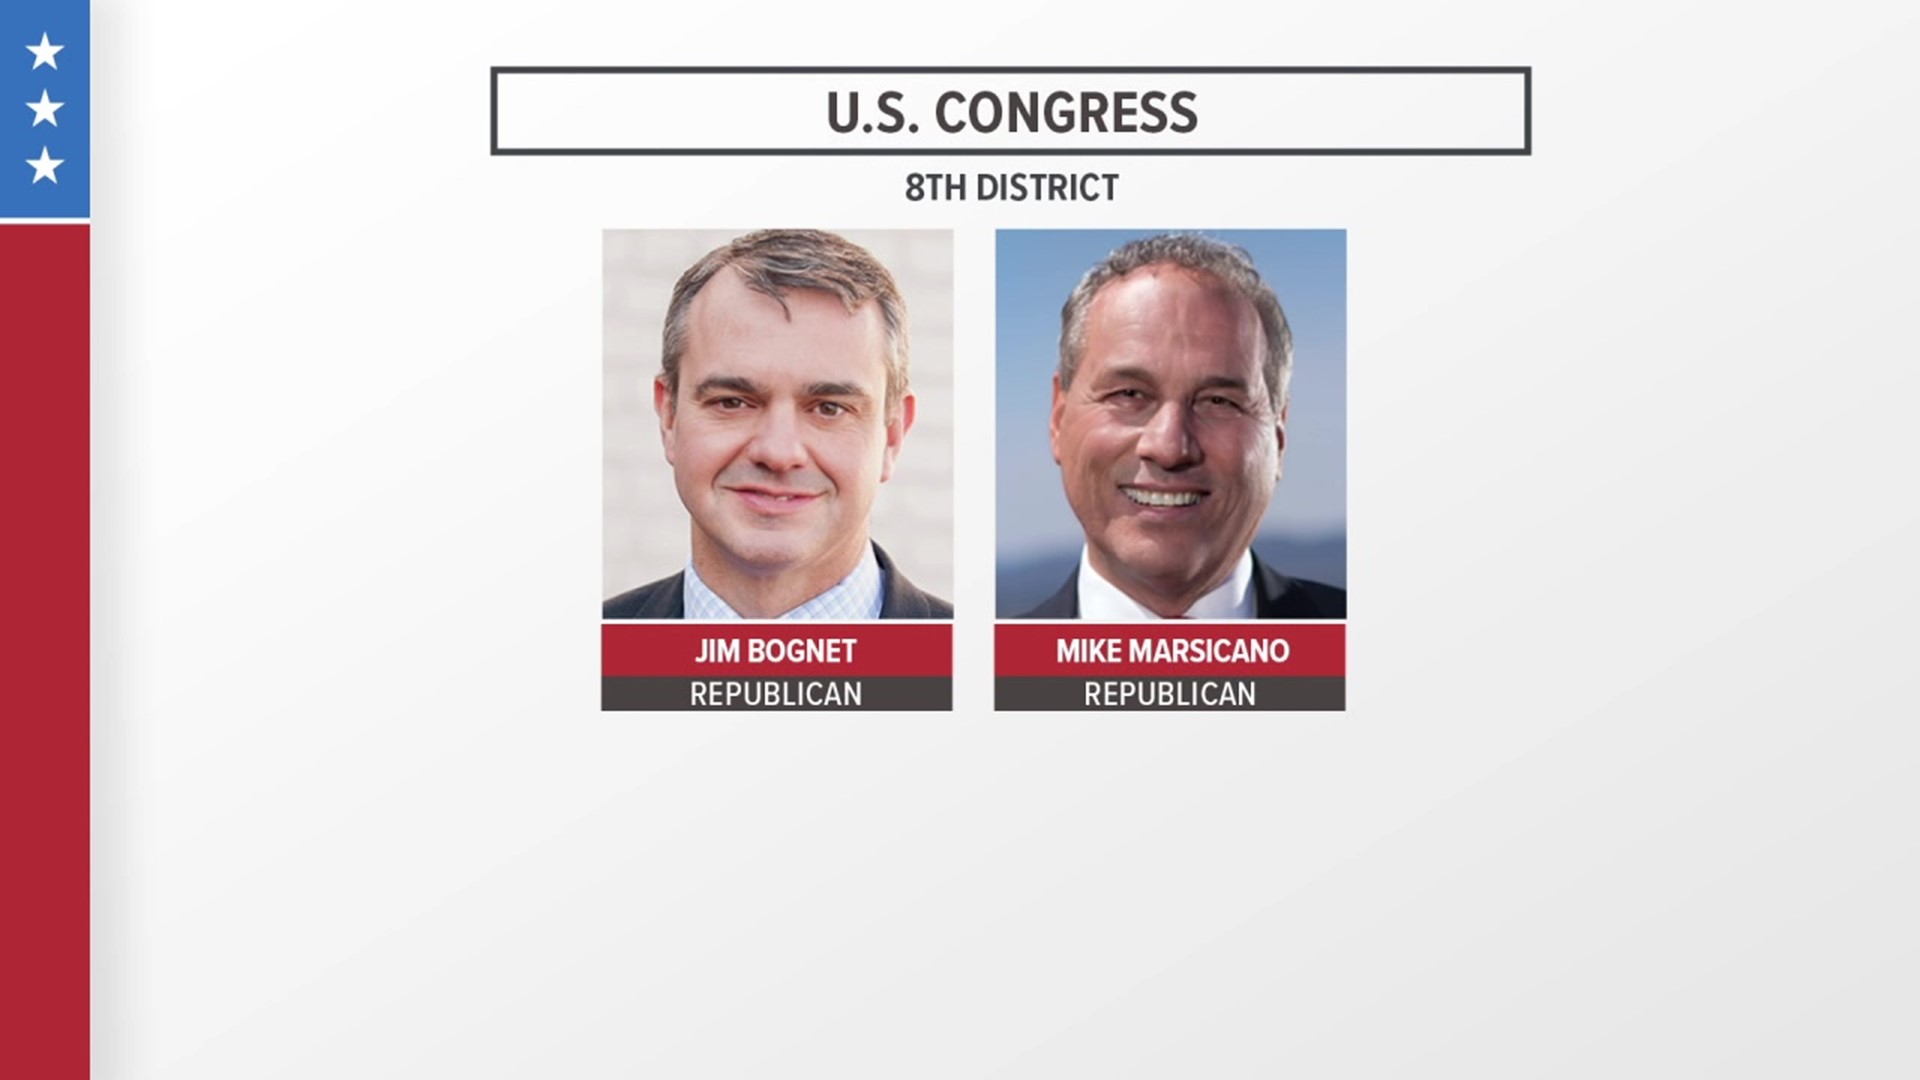 With just days to go until the primary elections, candidates in Pennsylvania's 8th congressional district make their final appeals to voters.